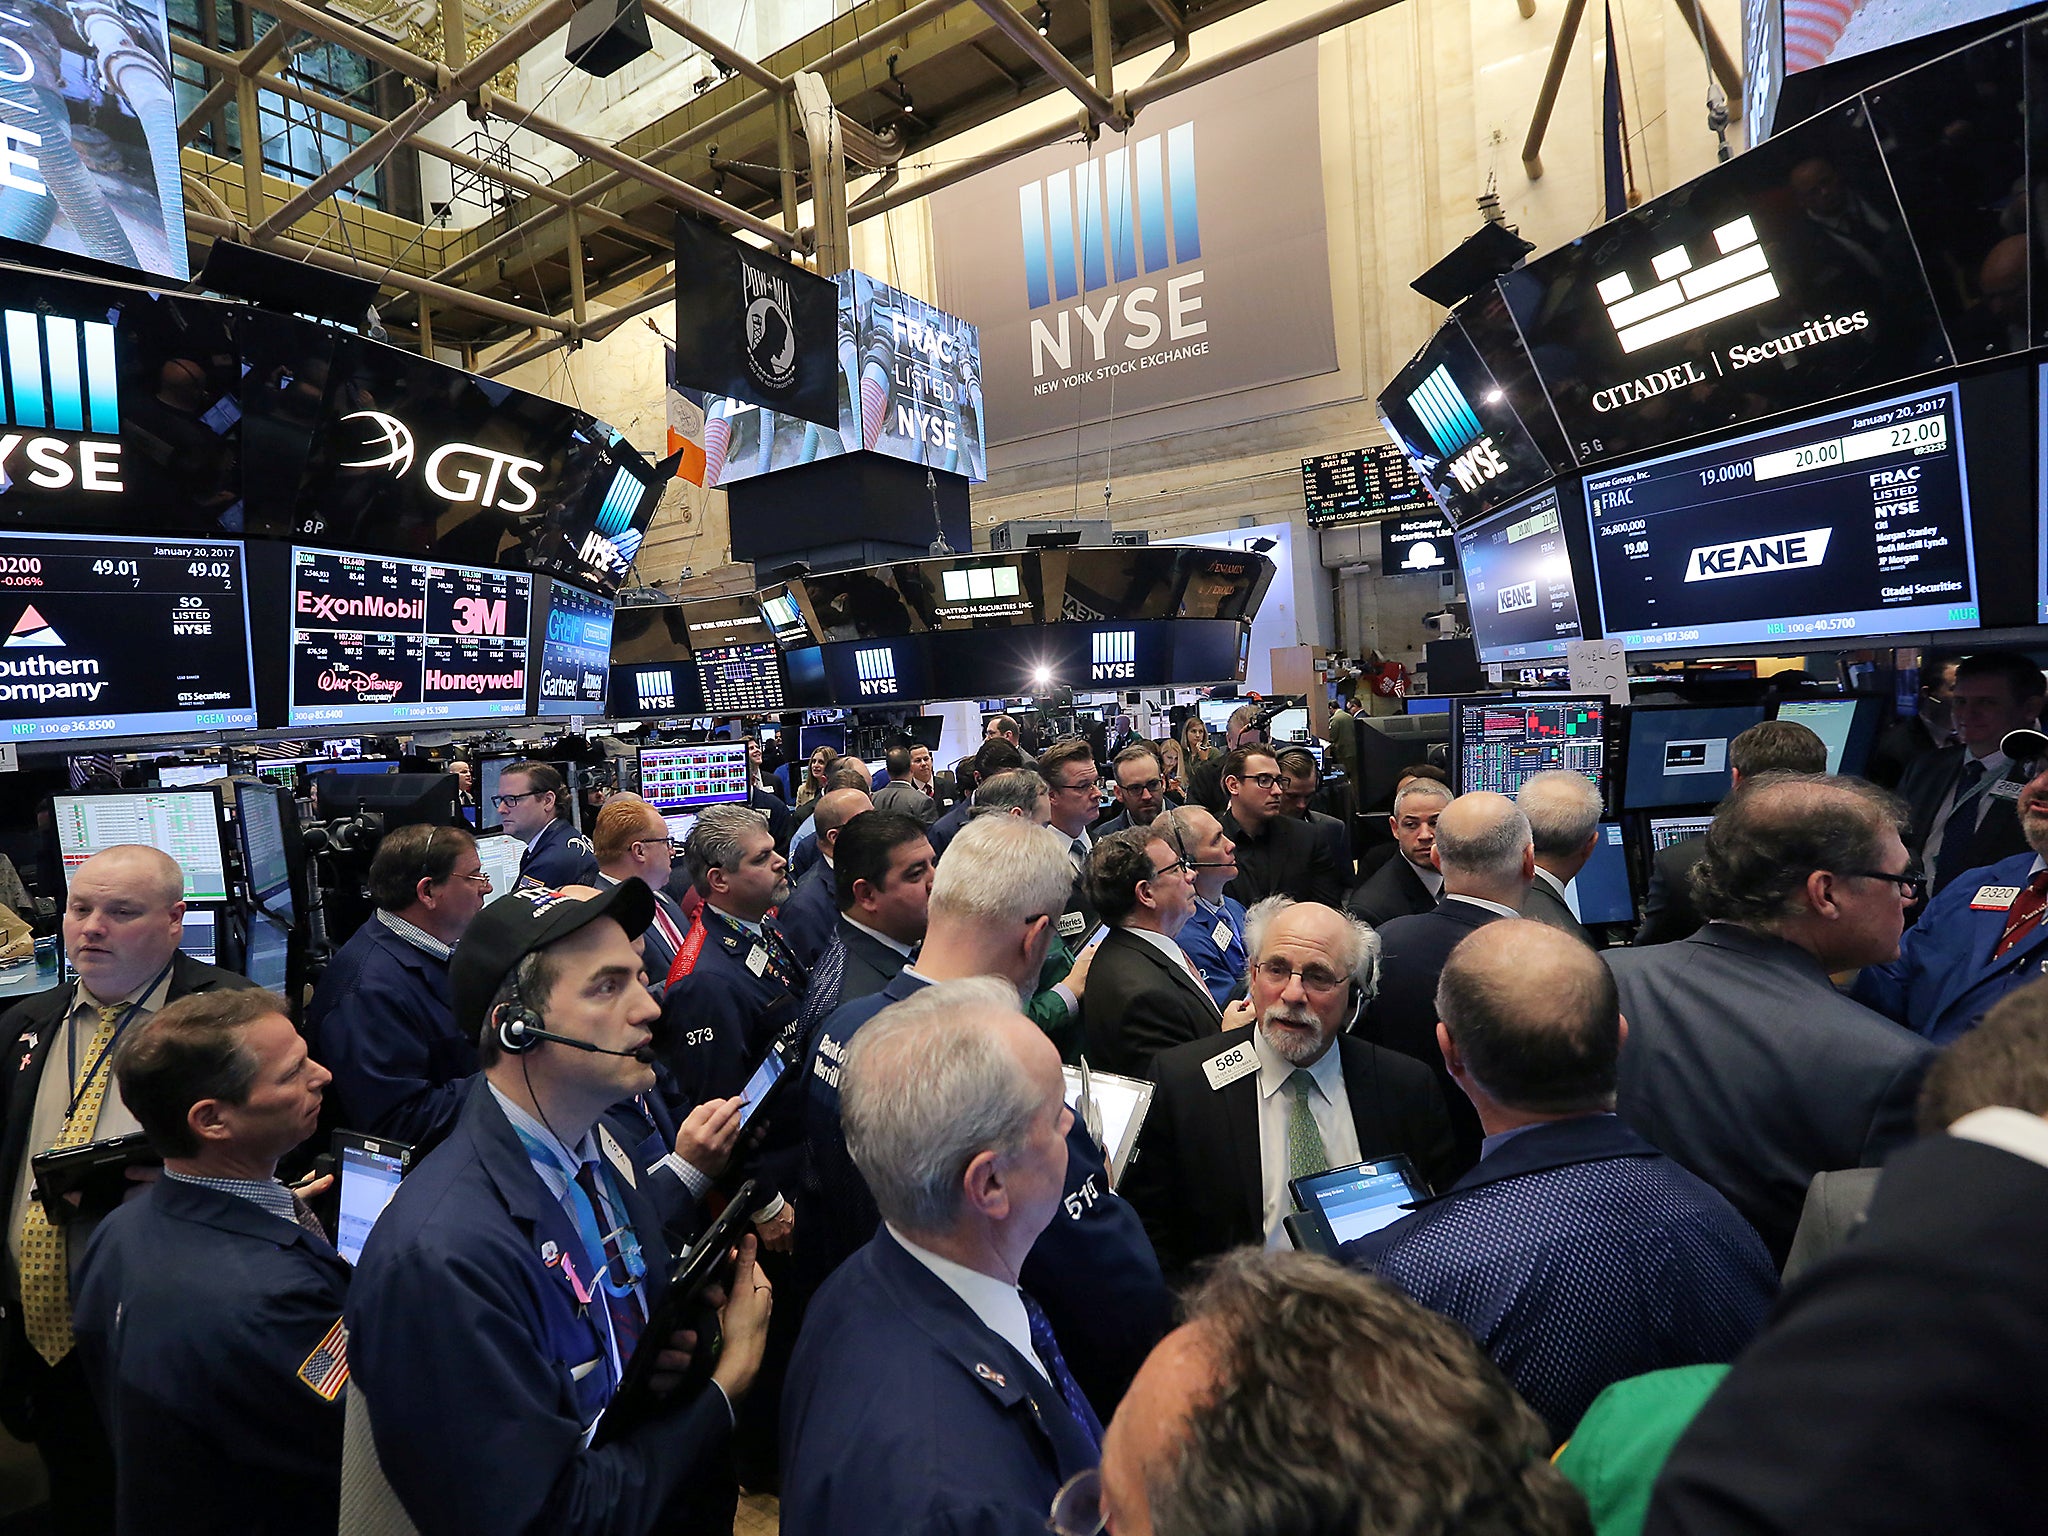 Traders gather on the floor of the New York Stock Exchange (NYSE) in Manhattan, New York City